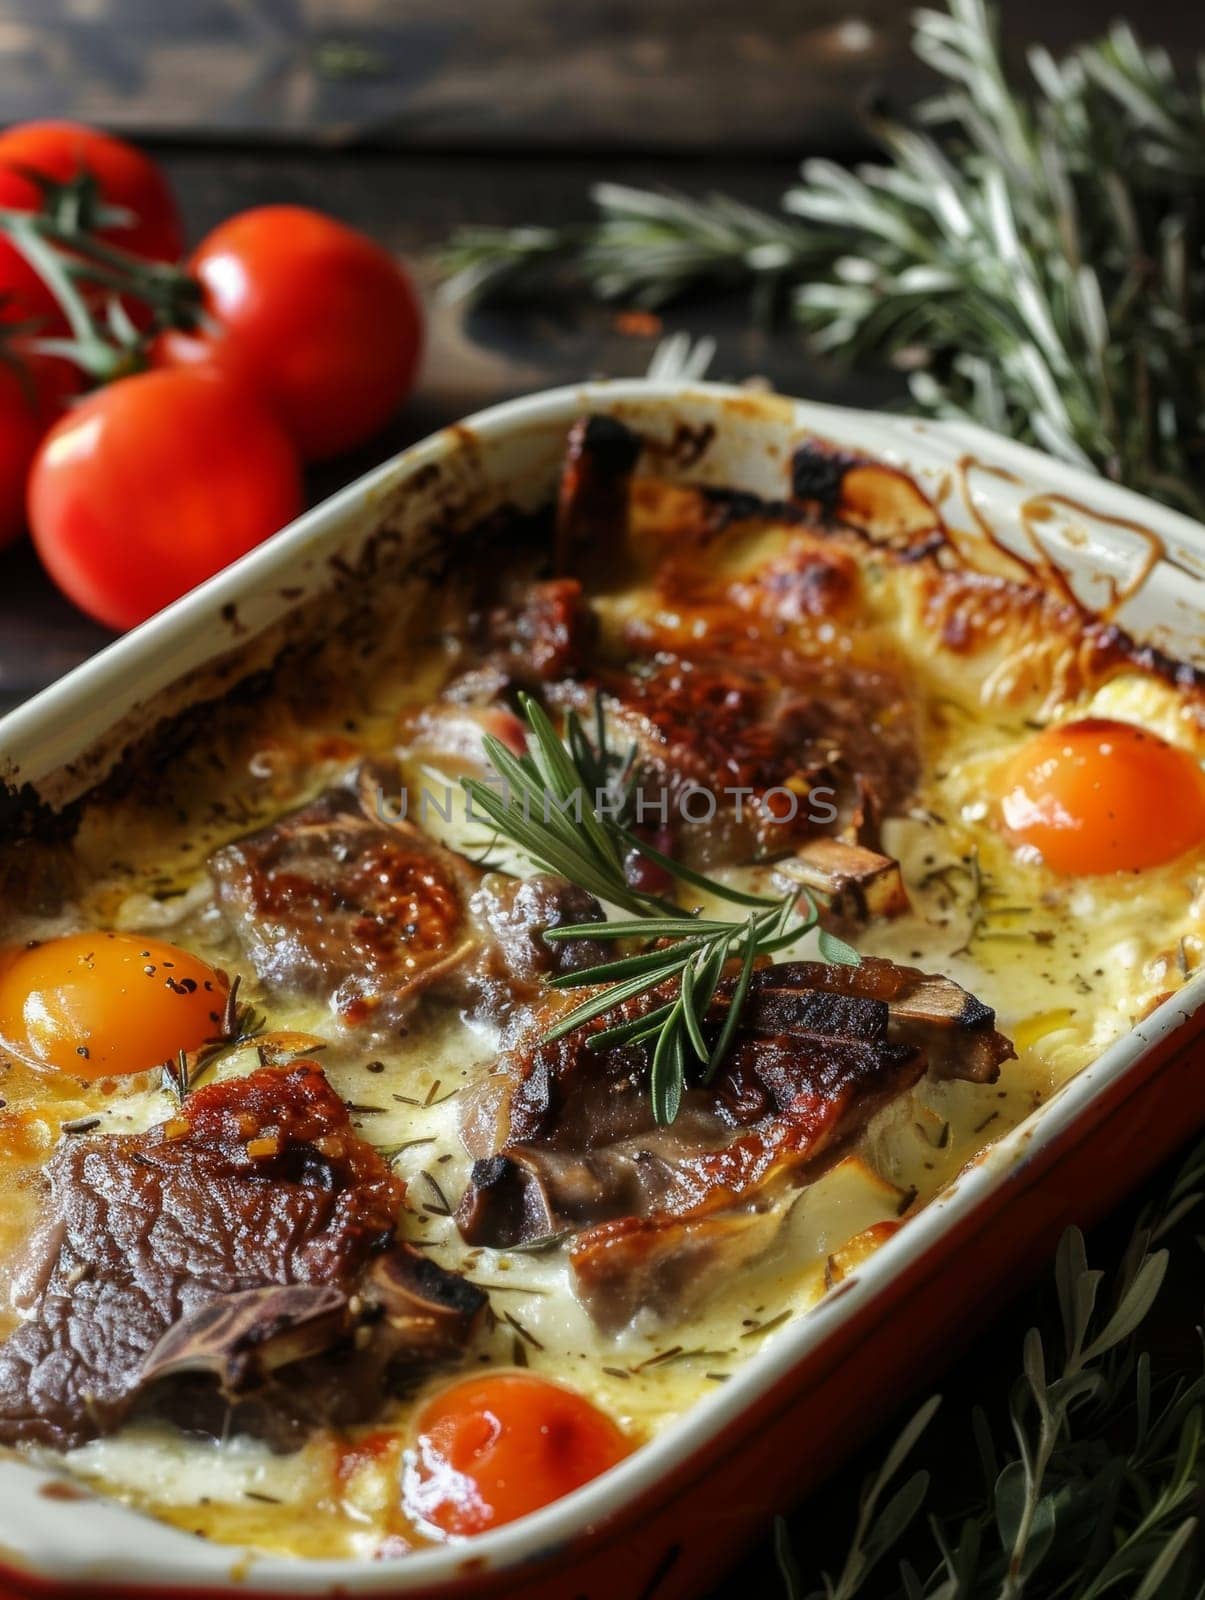 Albanian tave kosi or tave elbasani, dish of lamb baked in a creamy yogurt and egg custard, presented in a baking dish. Comforting traditional Balkan meal reflects unique culinary heritage of Albania. by sfinks